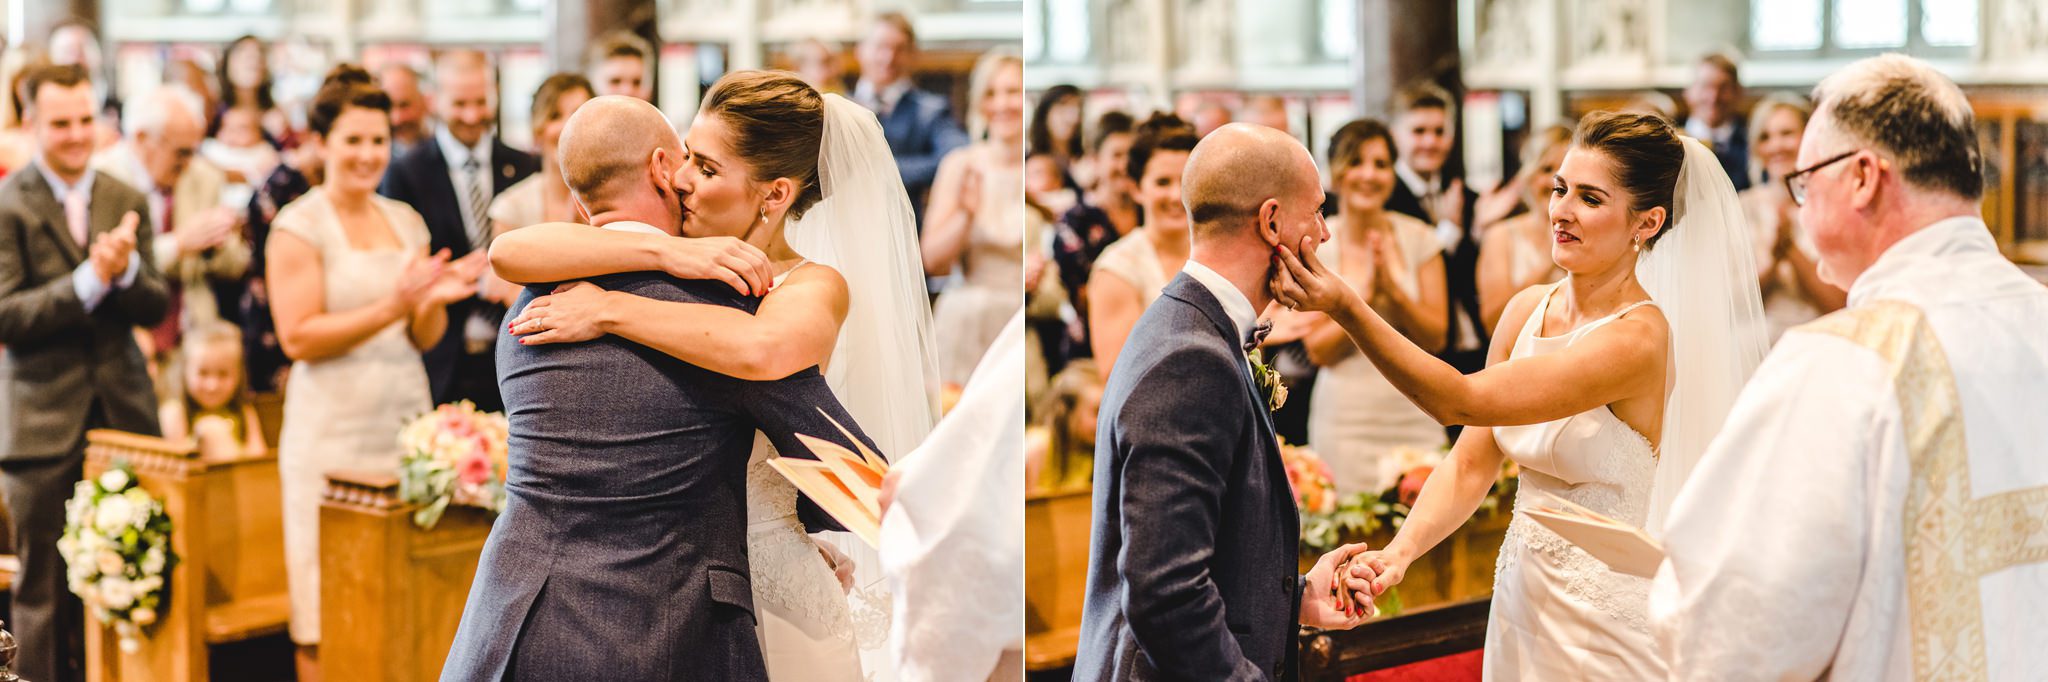 During the first kiss, the bride gets lipstick on the groom